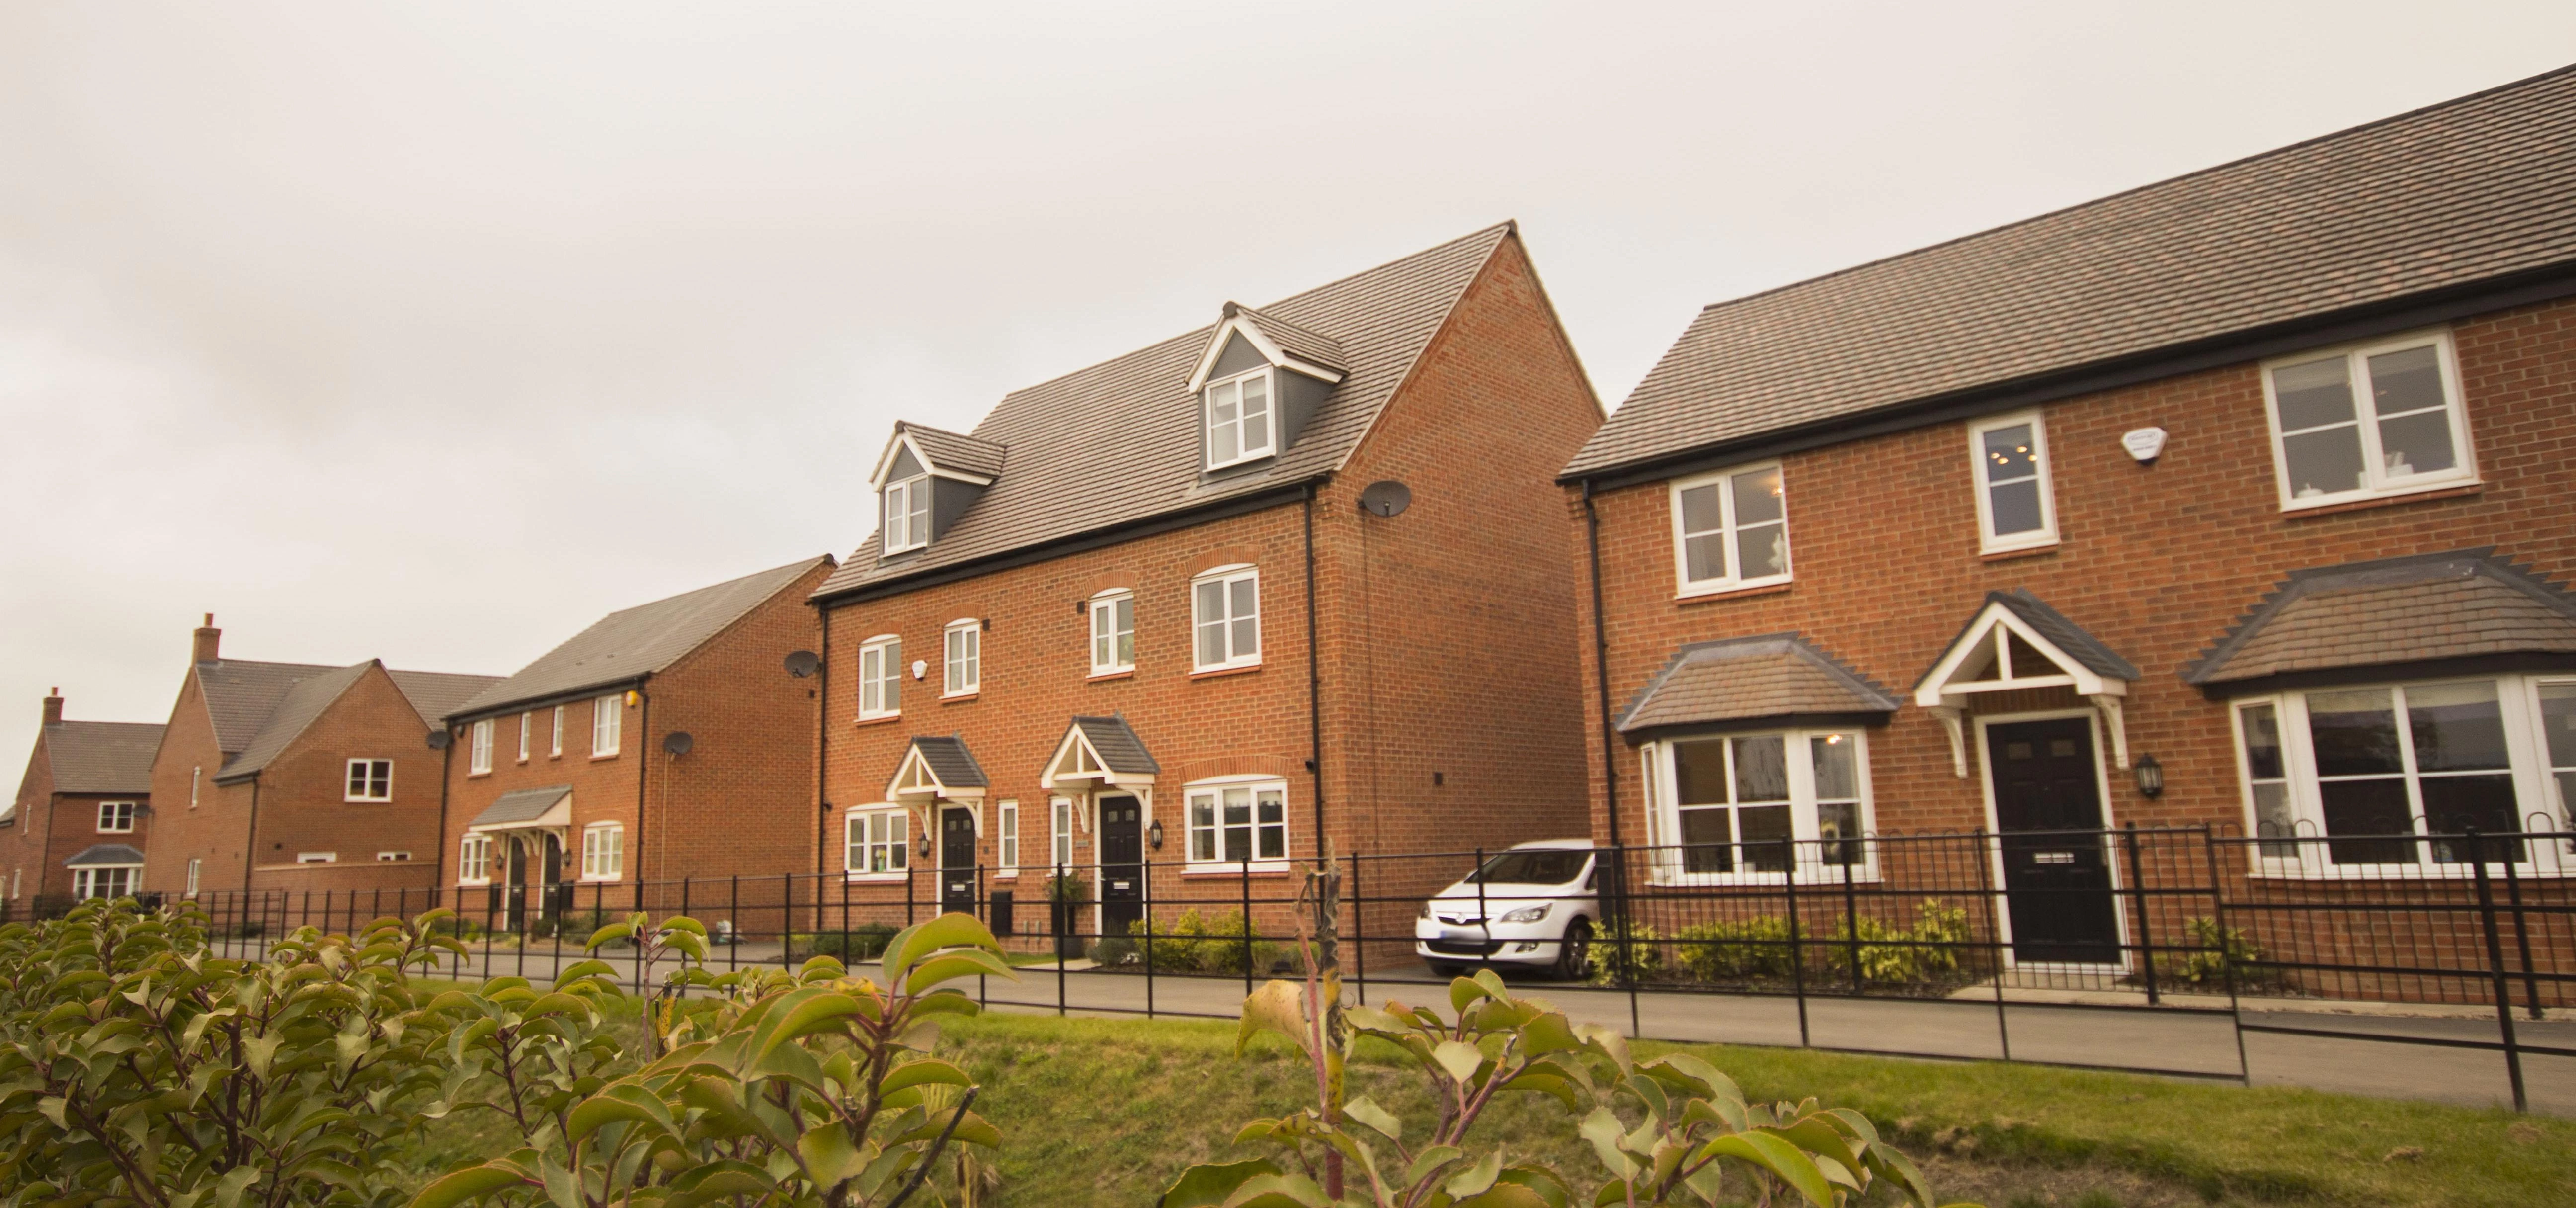 Construction work started in 2014 to bring much-needed homes to Boulton Moor.